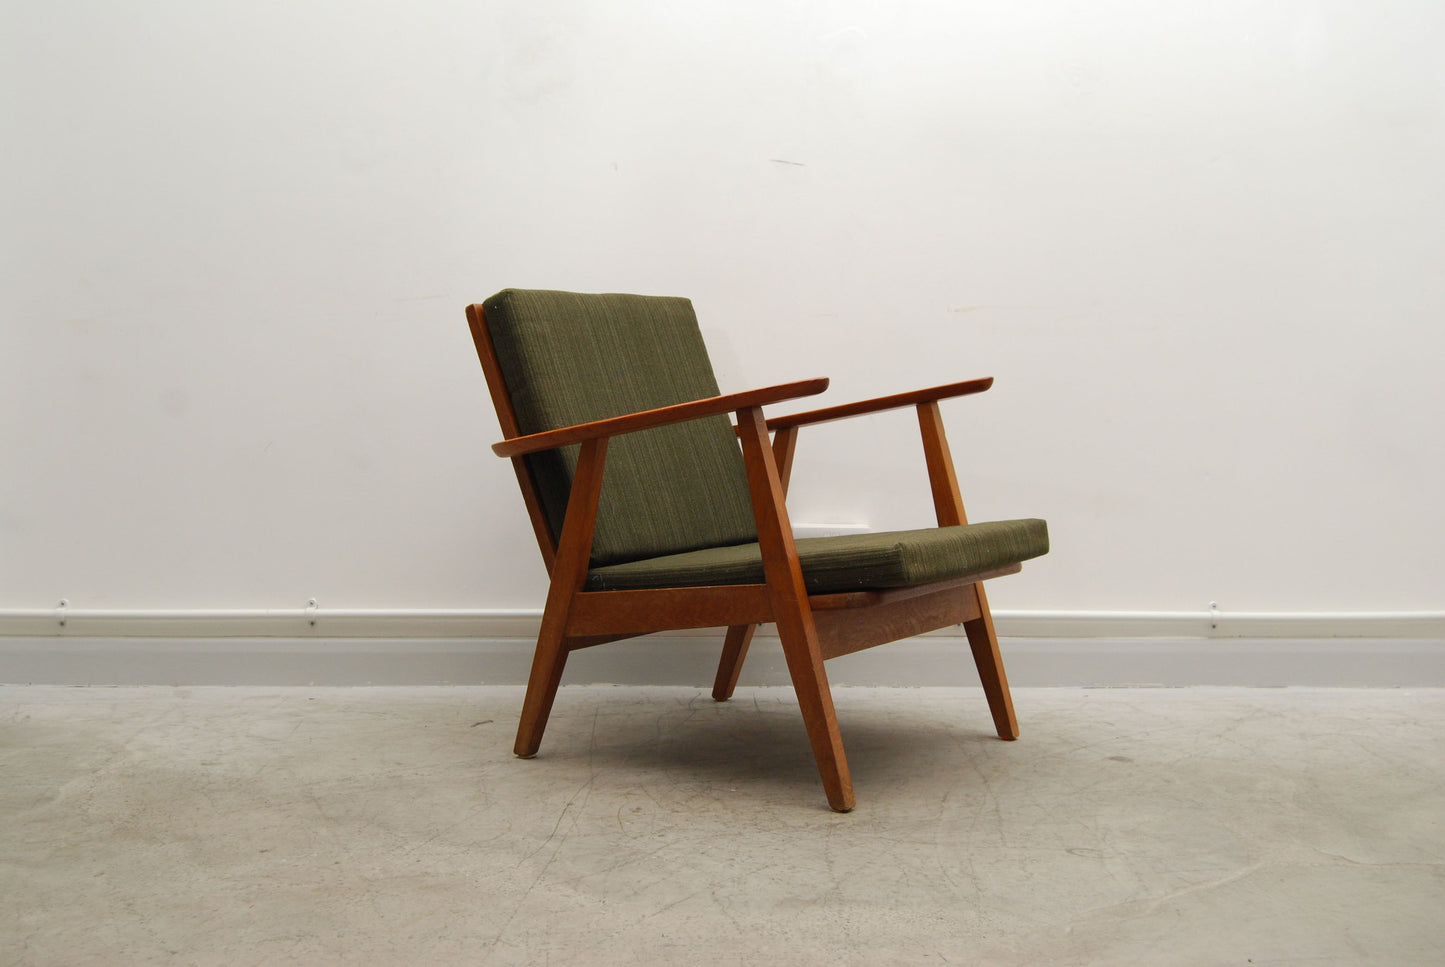 Teak lounge chair with forest green cushions